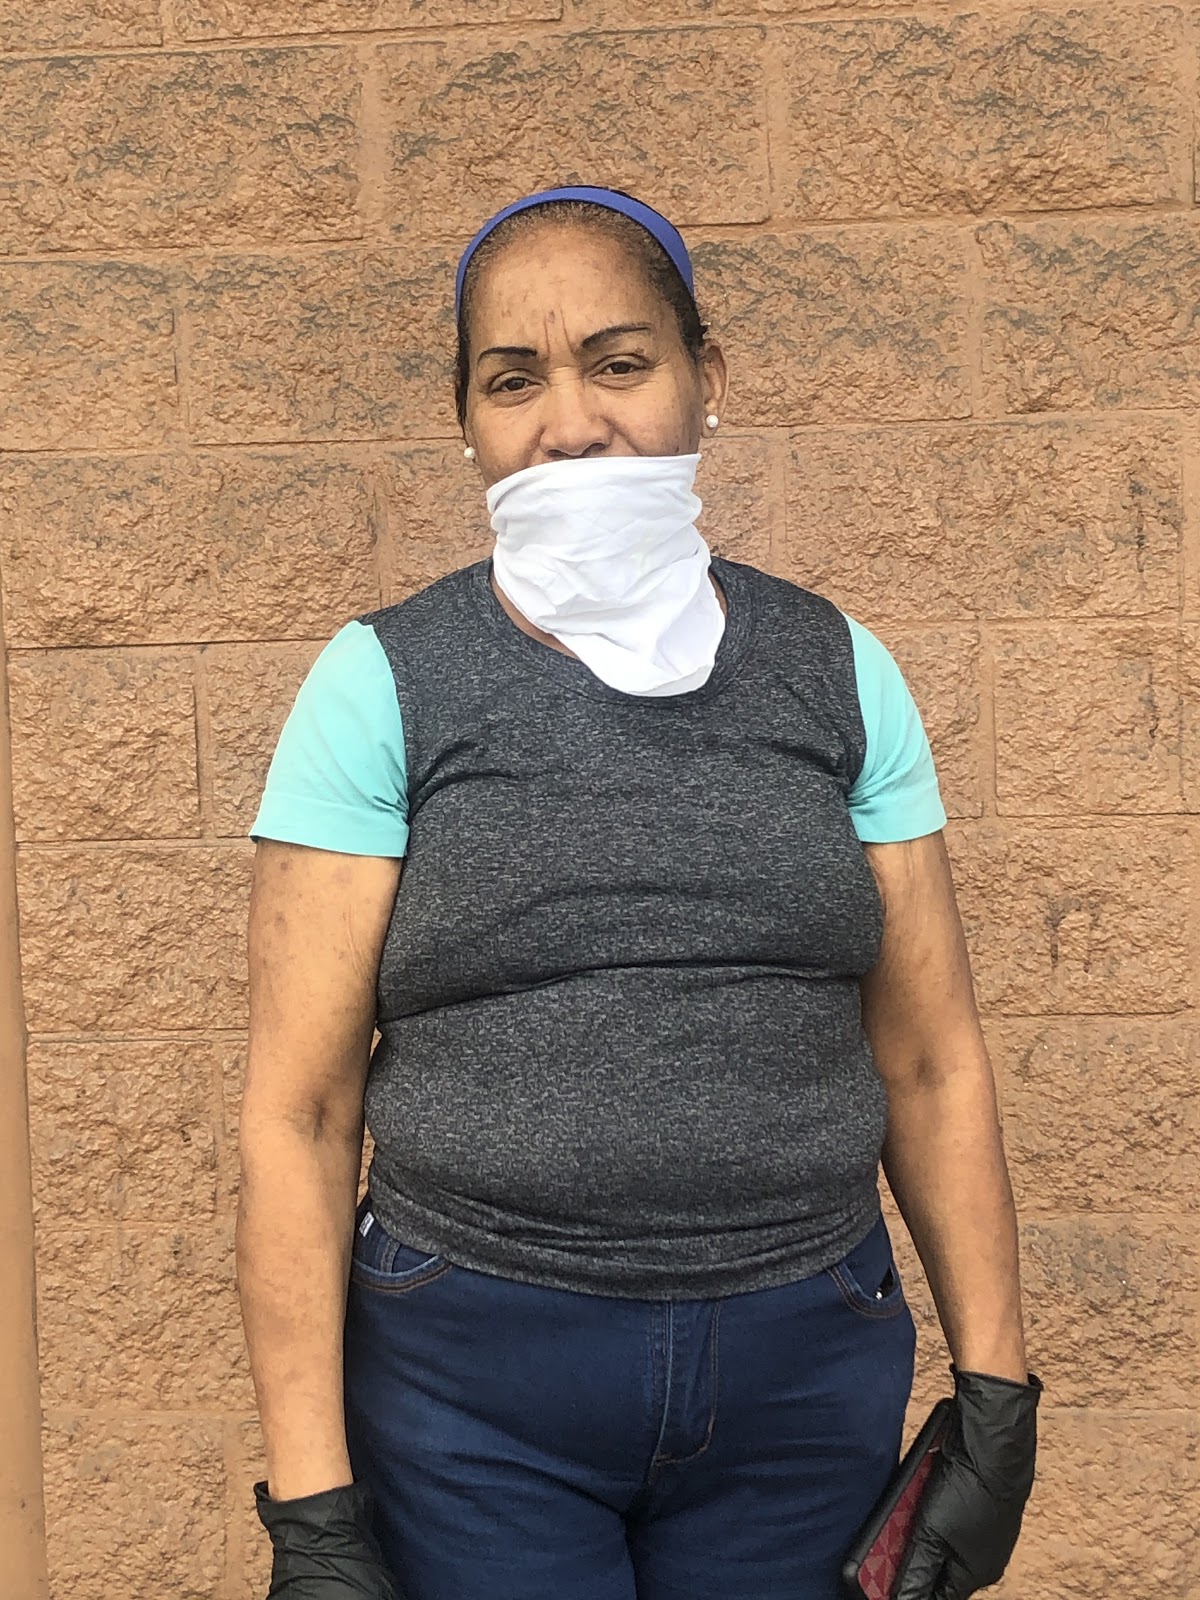 Doris, a worker-leader, voted for her family and coworkers.